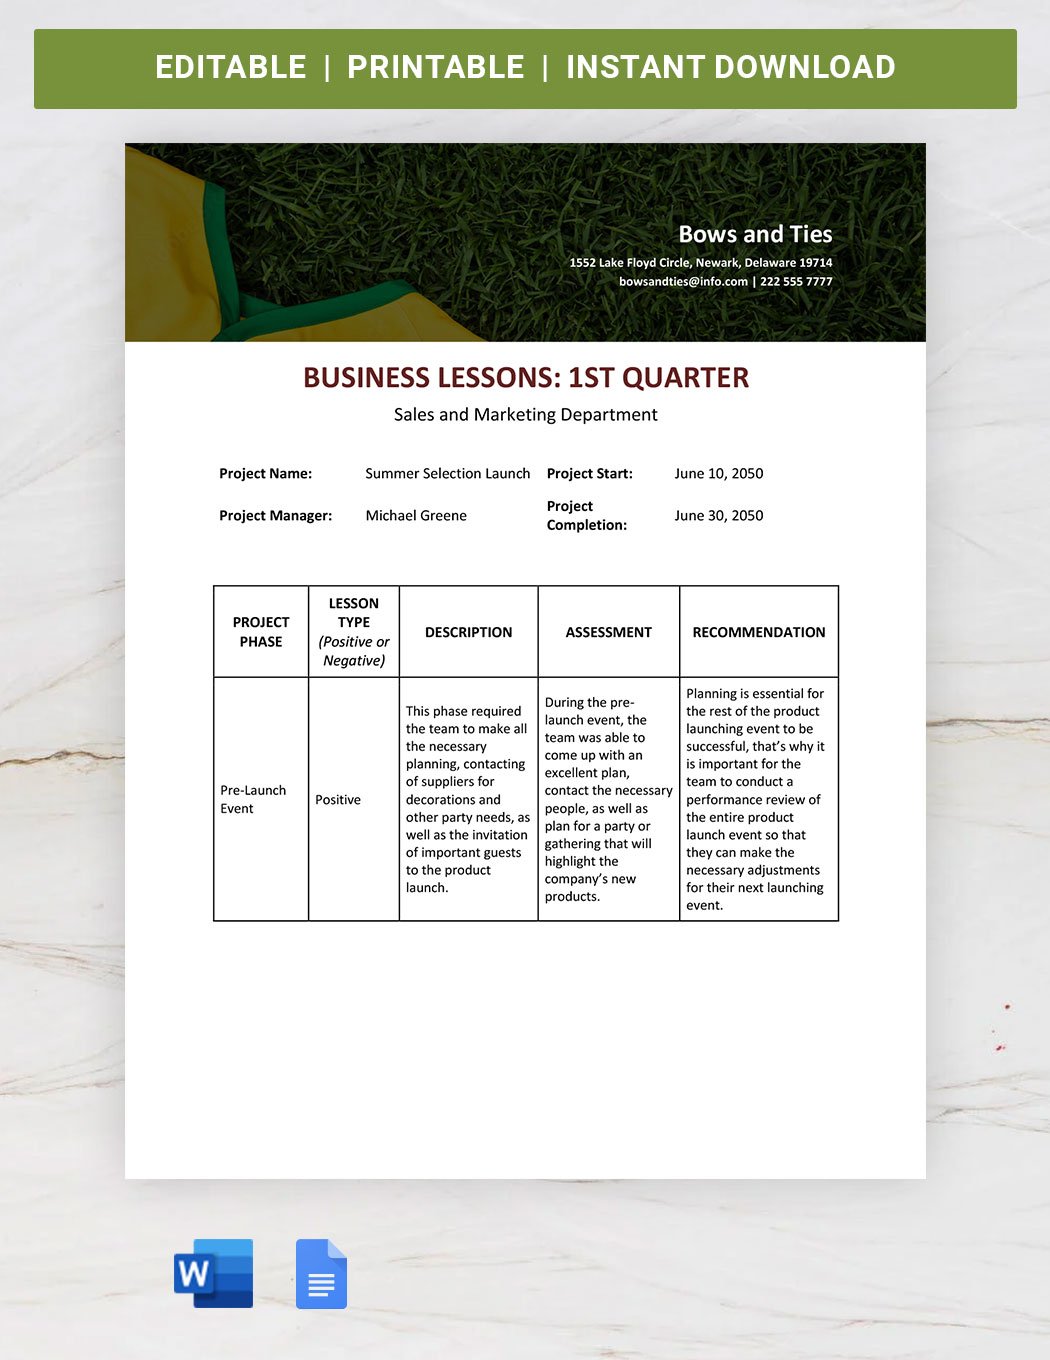 Business Lessons Learned Template